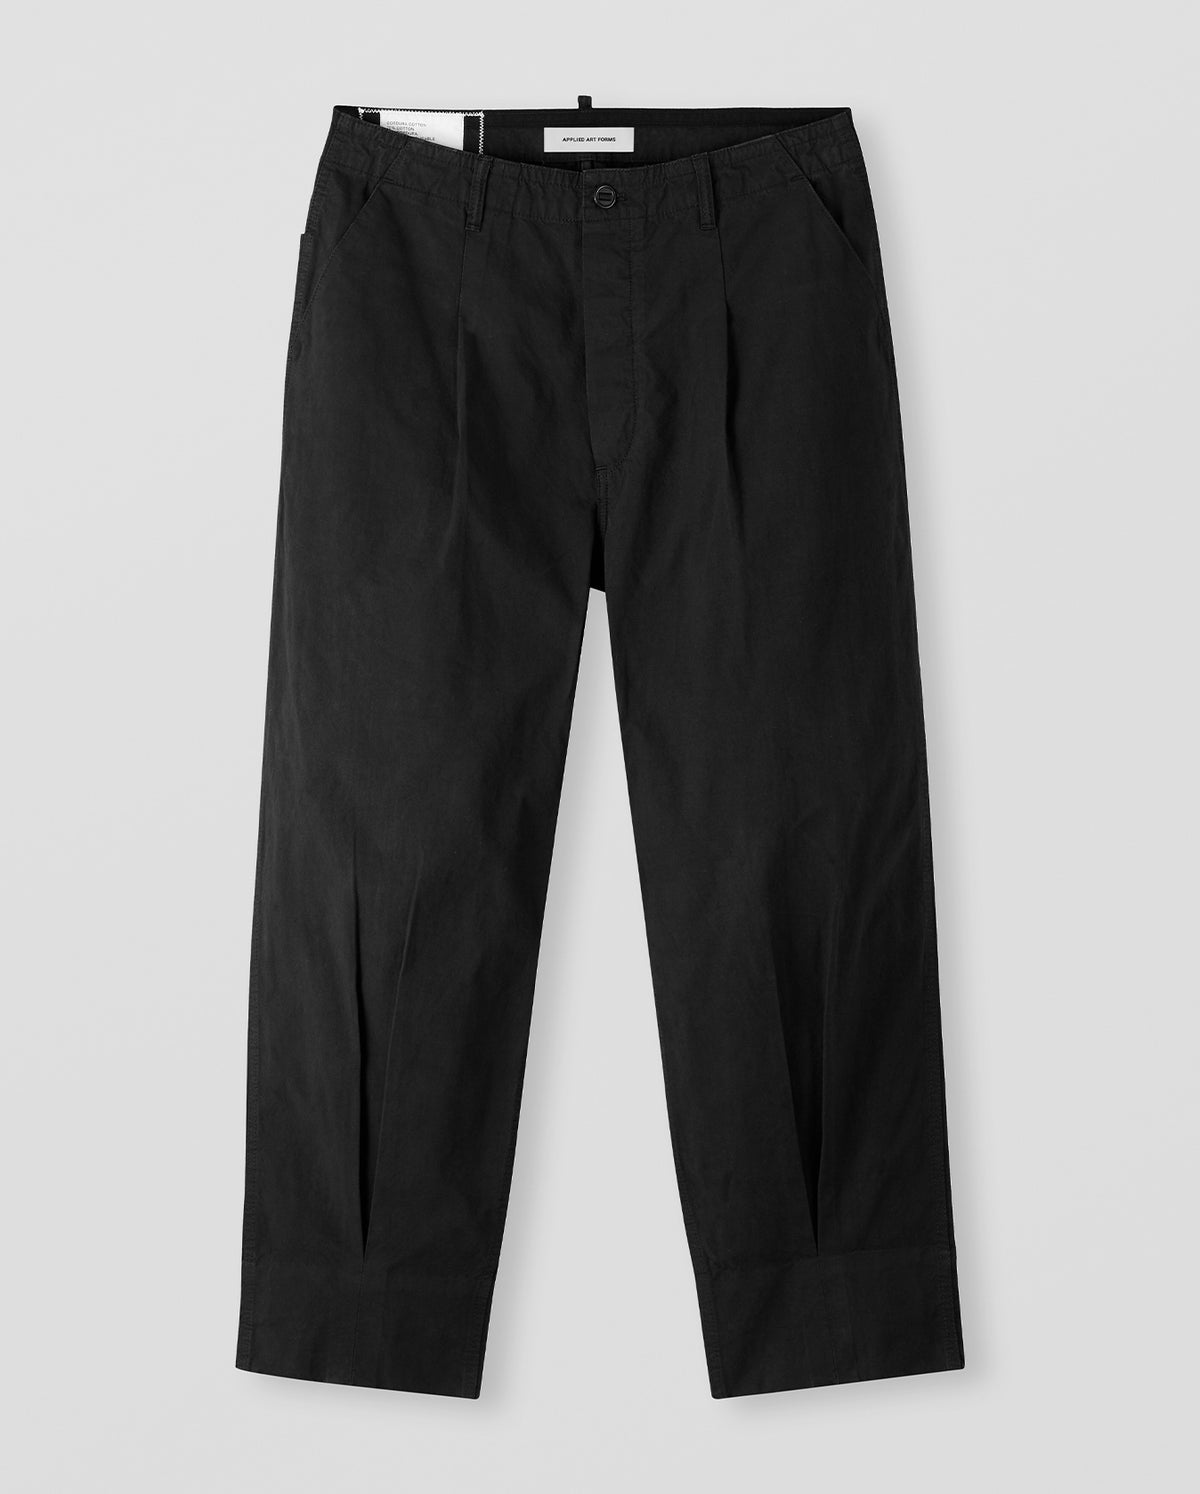 Japanese Cargo - Cropped Trouser - Black